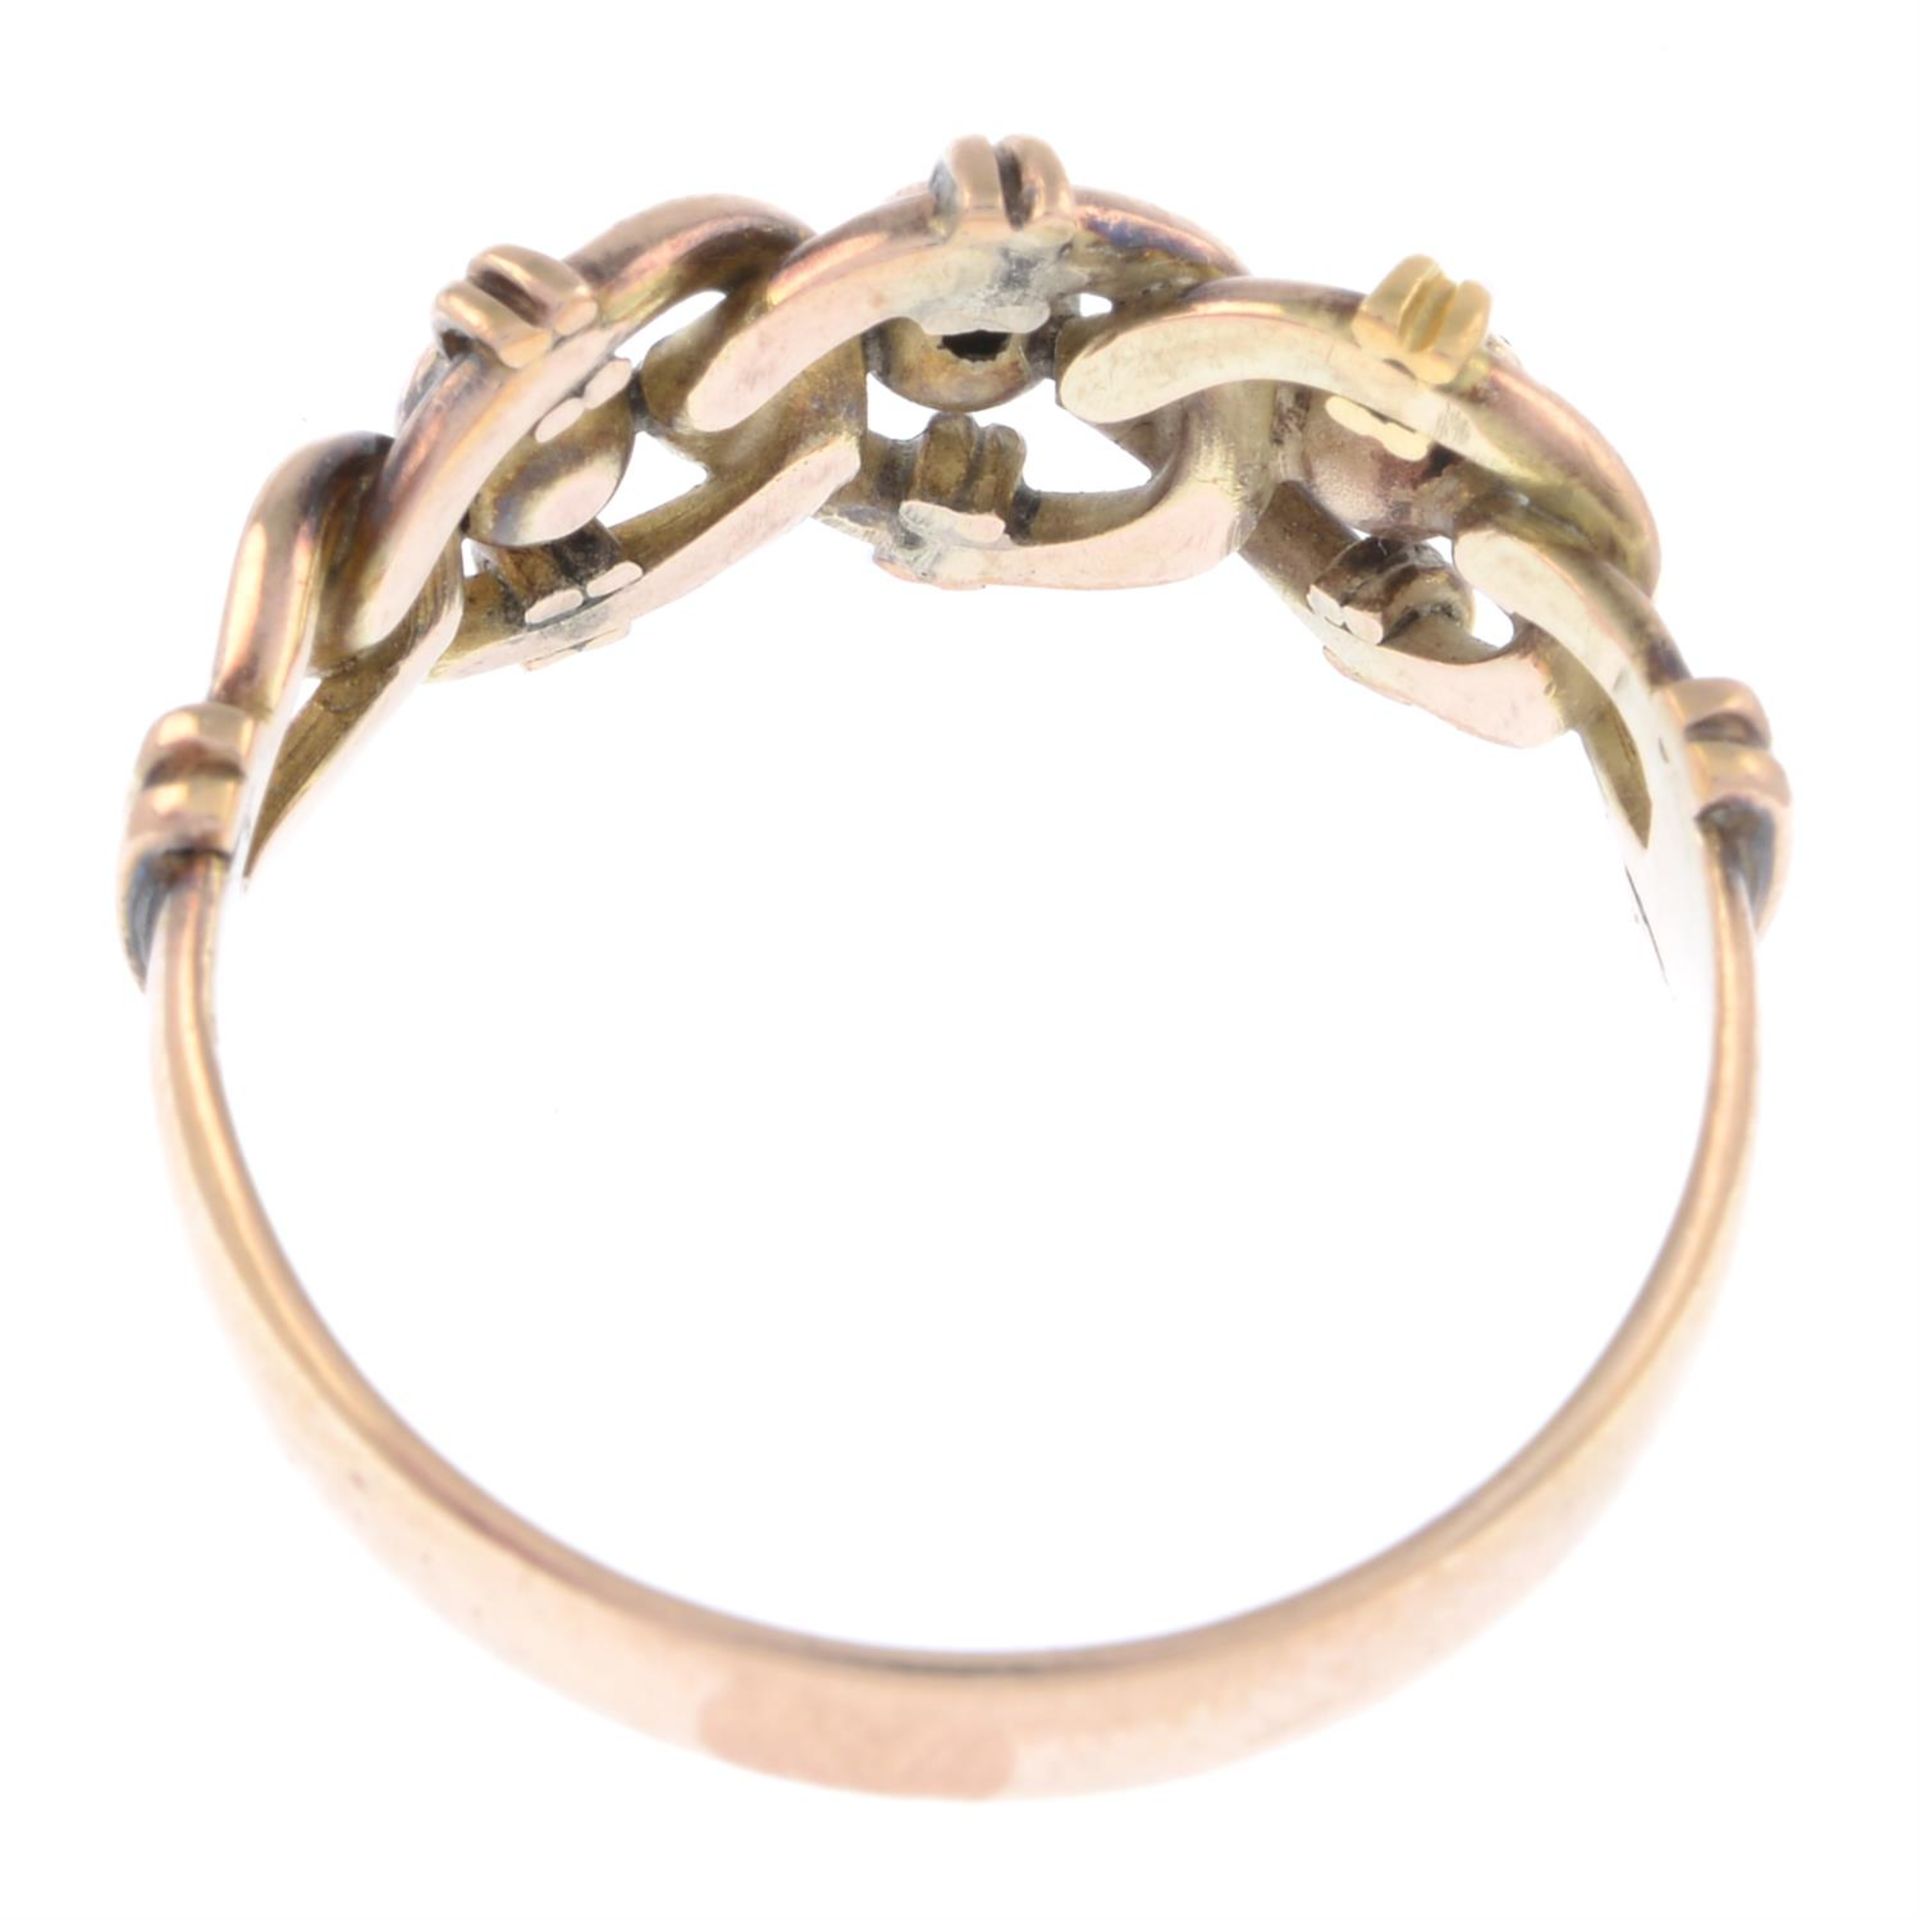 Early 20th century 9ct gold ring - Image 2 of 2